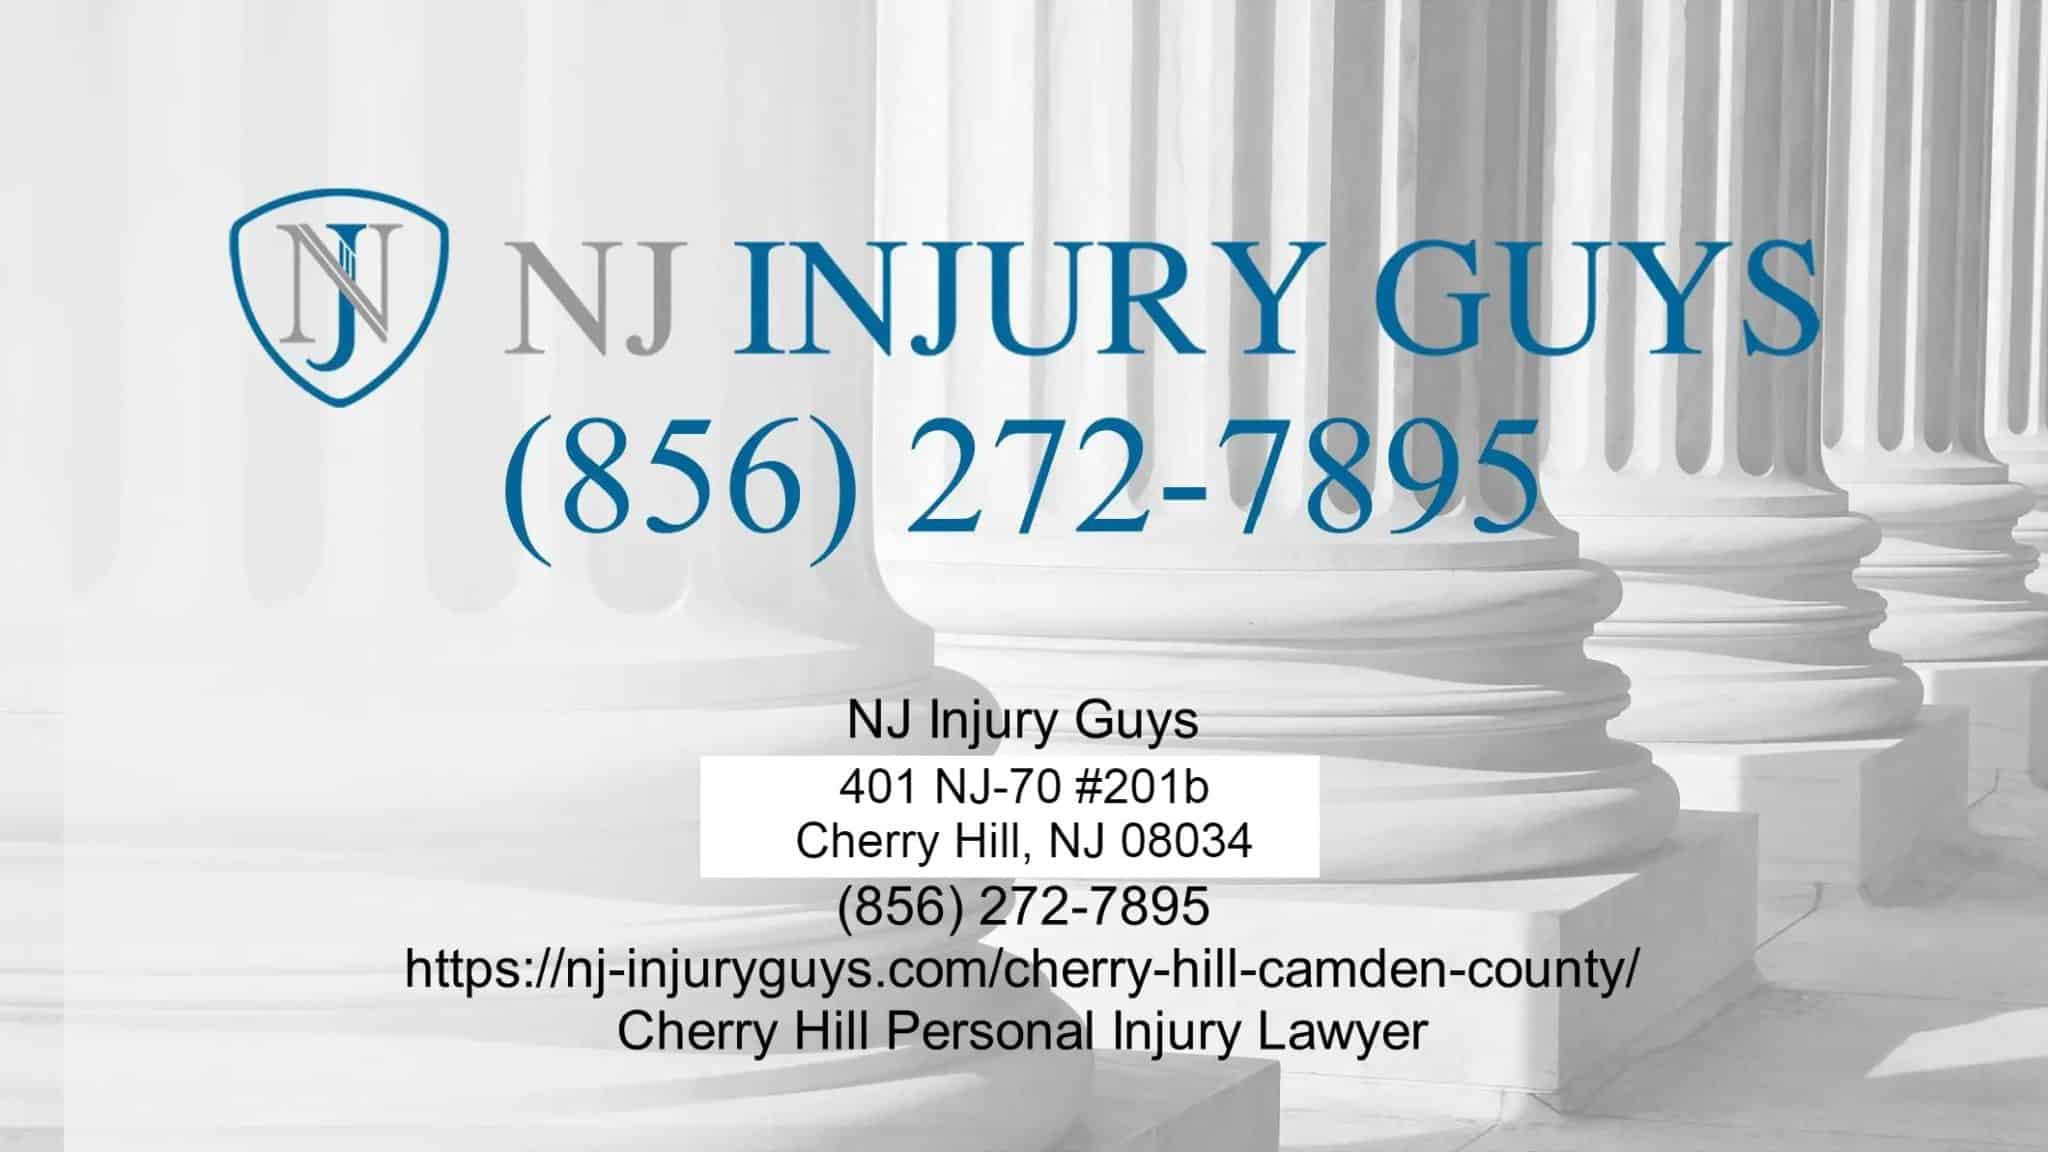 The Best Cherry Hill Personal Injury Law Firm Takes No-Win, No-Fee Cases